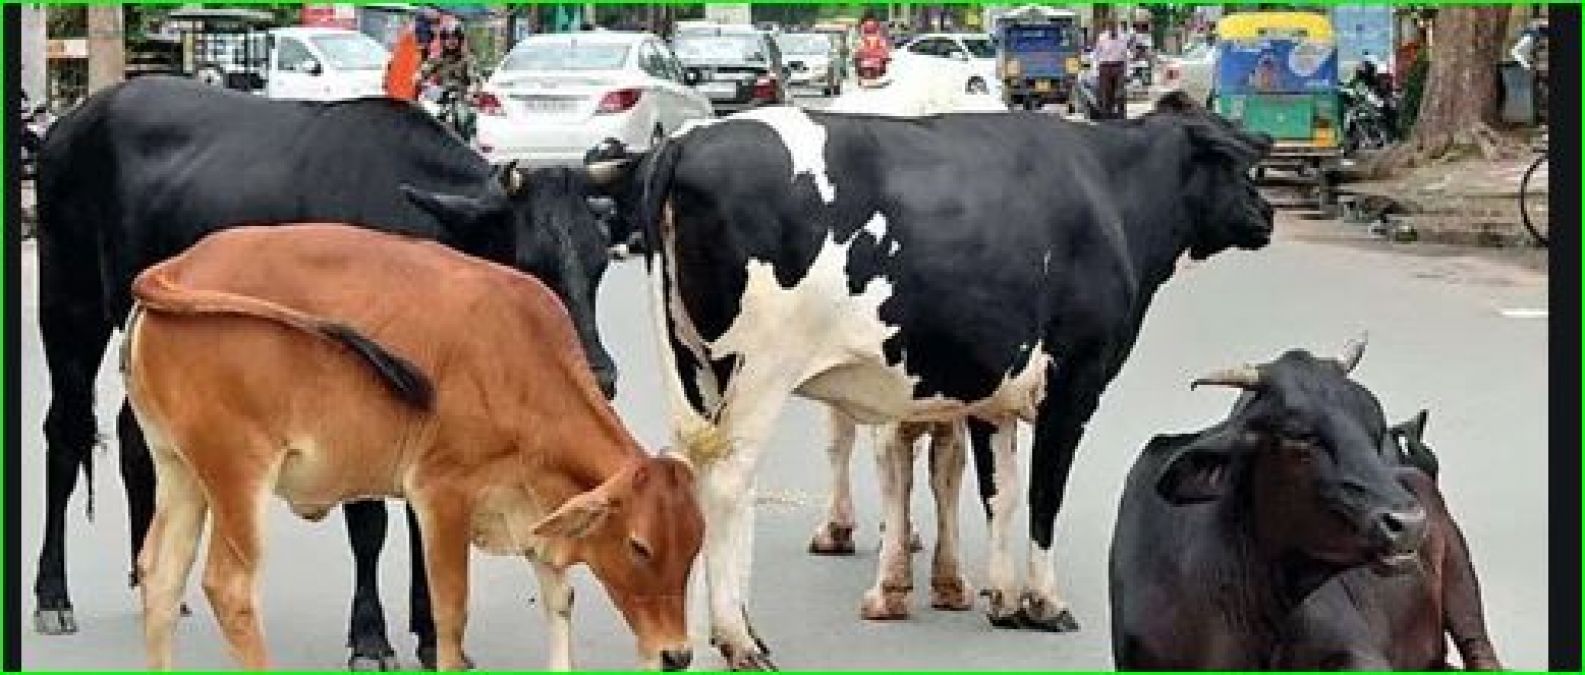 Goa waste management minister claims, 'stray cattle have become carnivorous'